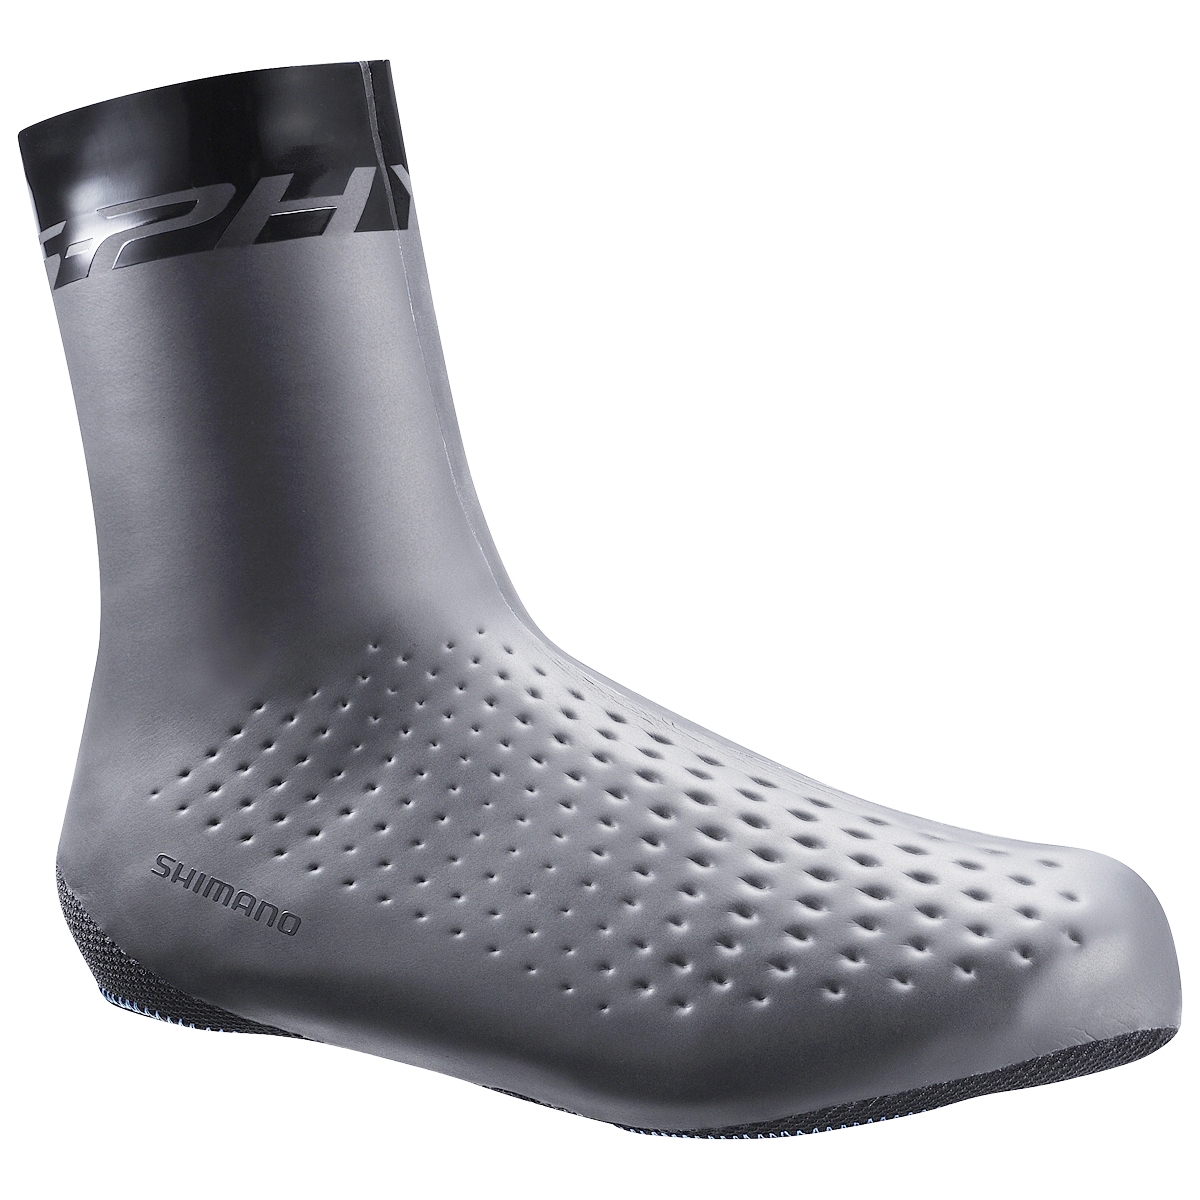 Waterproof S-phyre insulated grey overshoes size M (40-42)